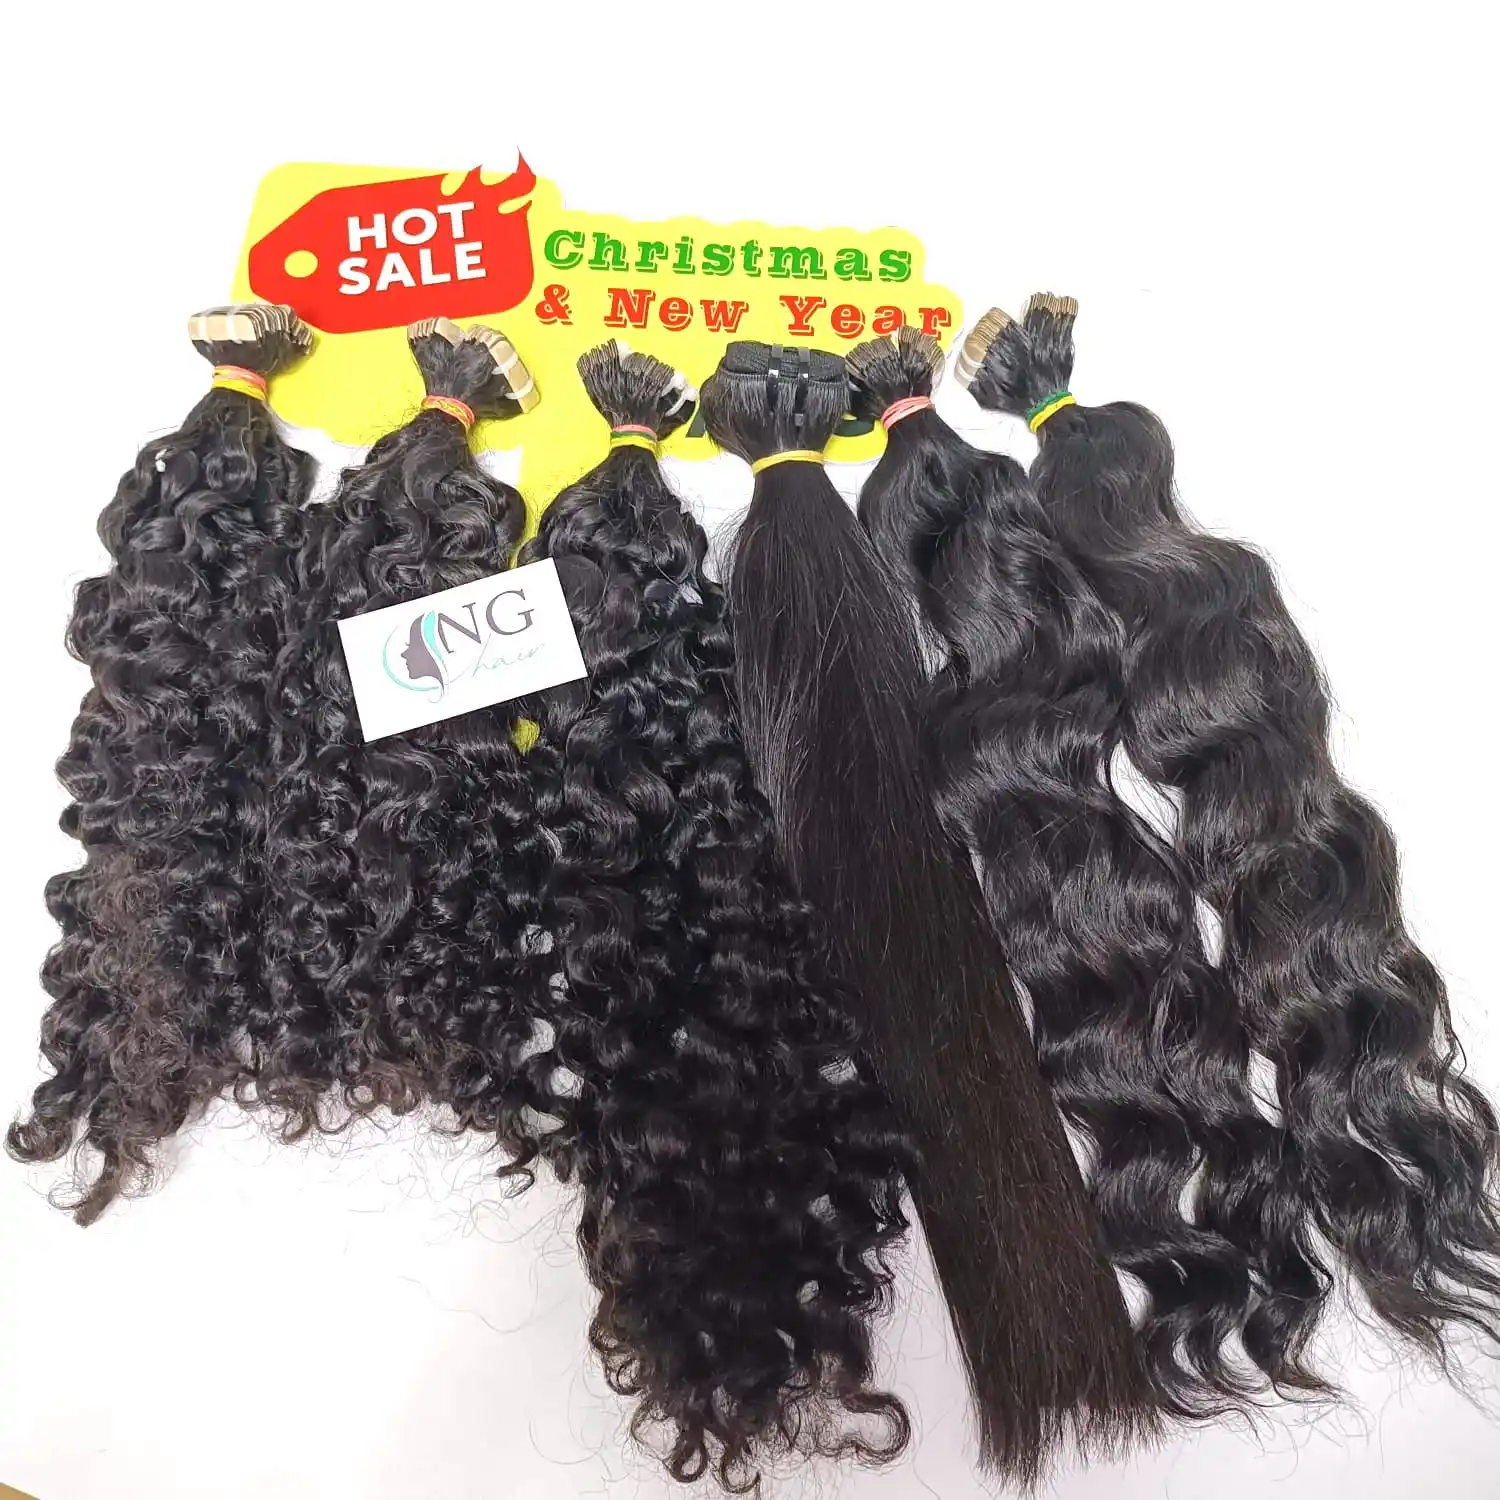 Discount all products 100% Vietnamese Human Hair, Full Color Burmese Curly Tap in Hair Extensions Welcome To Christmas.